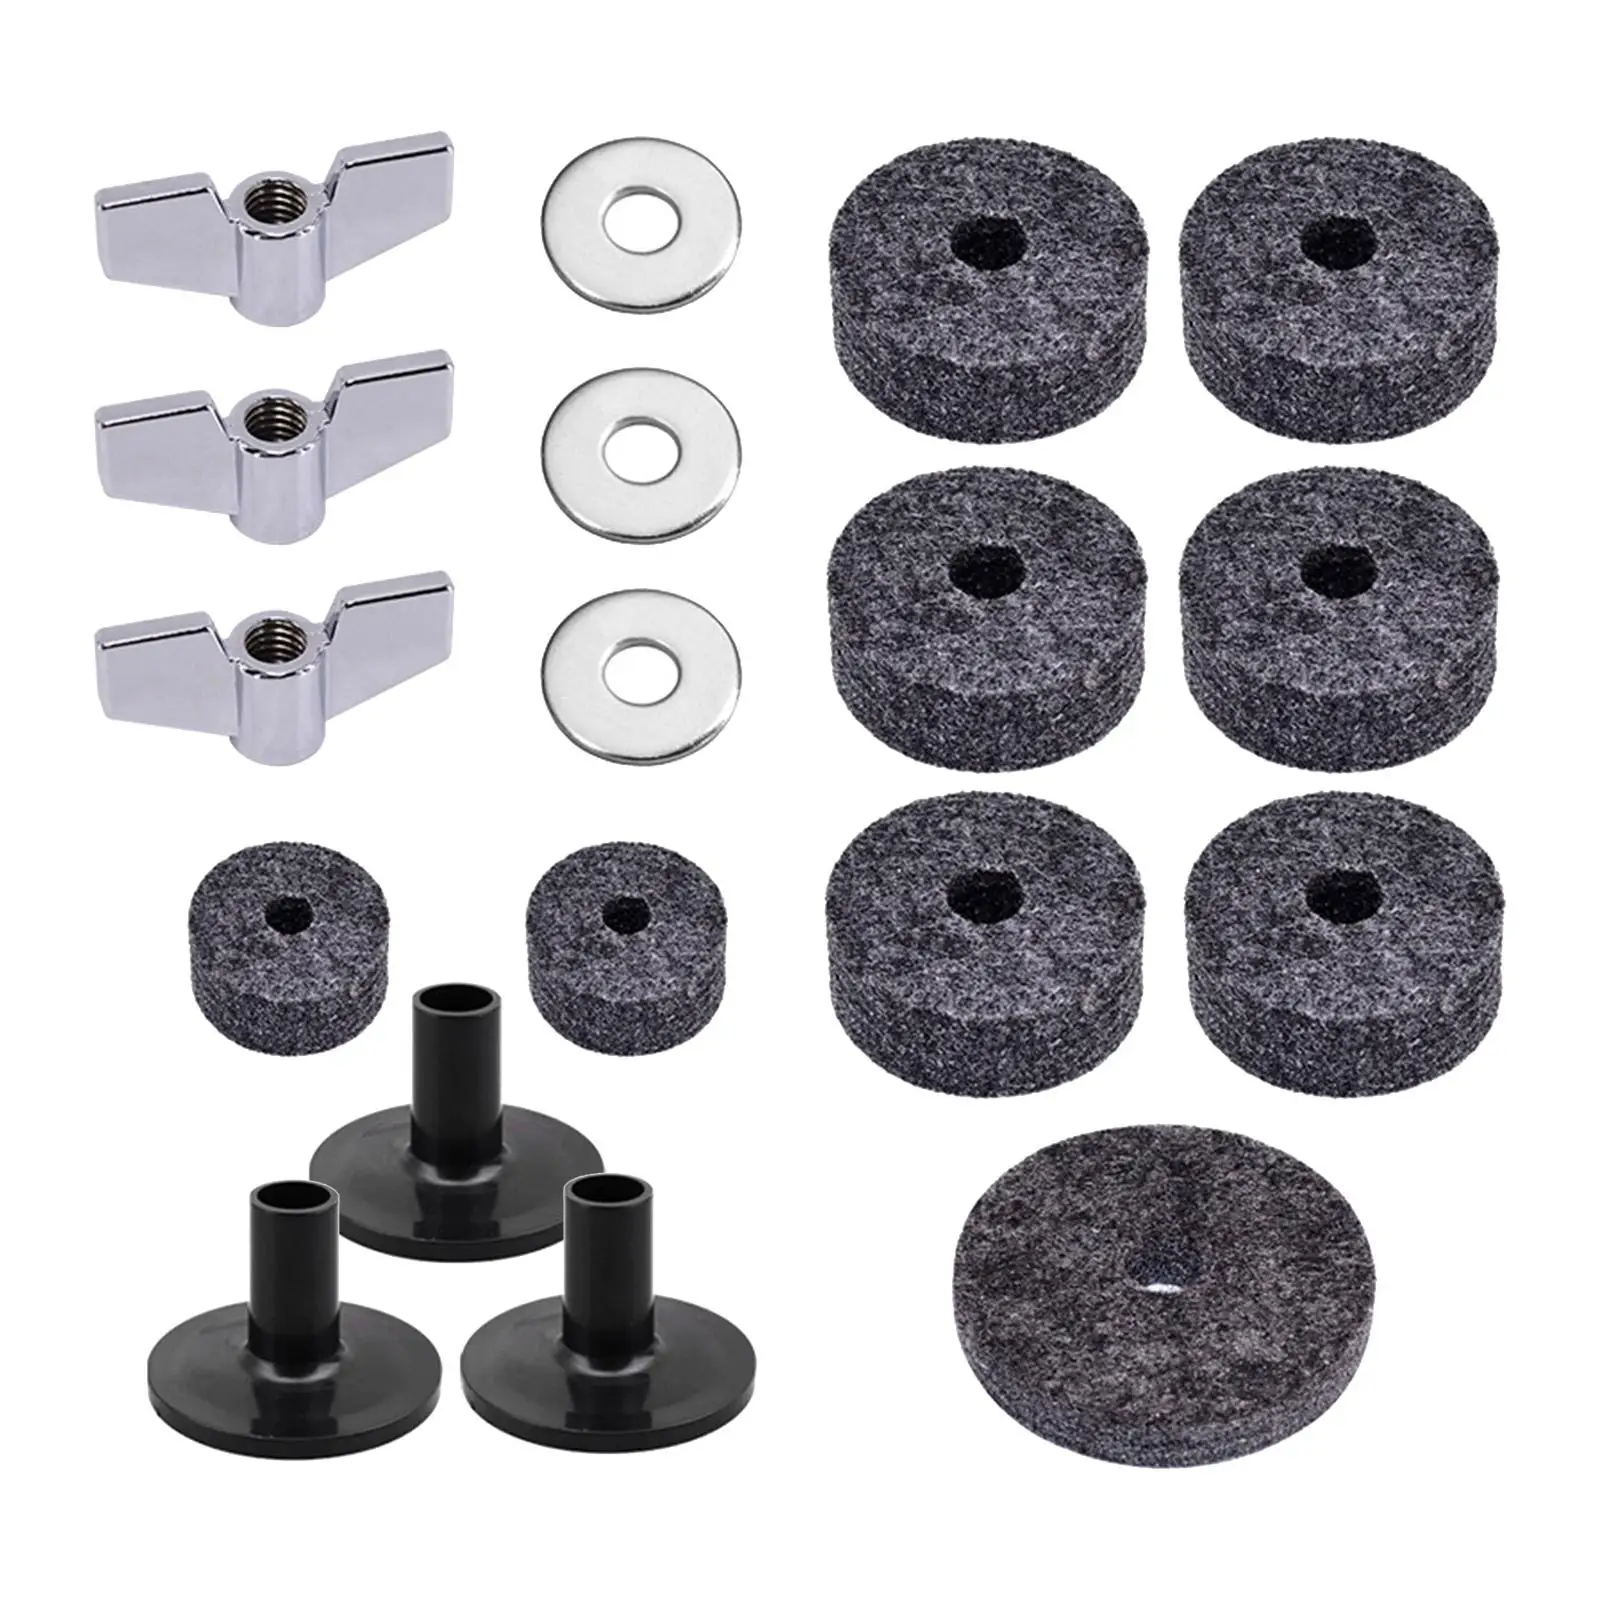 Replacement Cymbal Felts Washers Cymbal Washer, Wing Nuts, Equipment for Performer